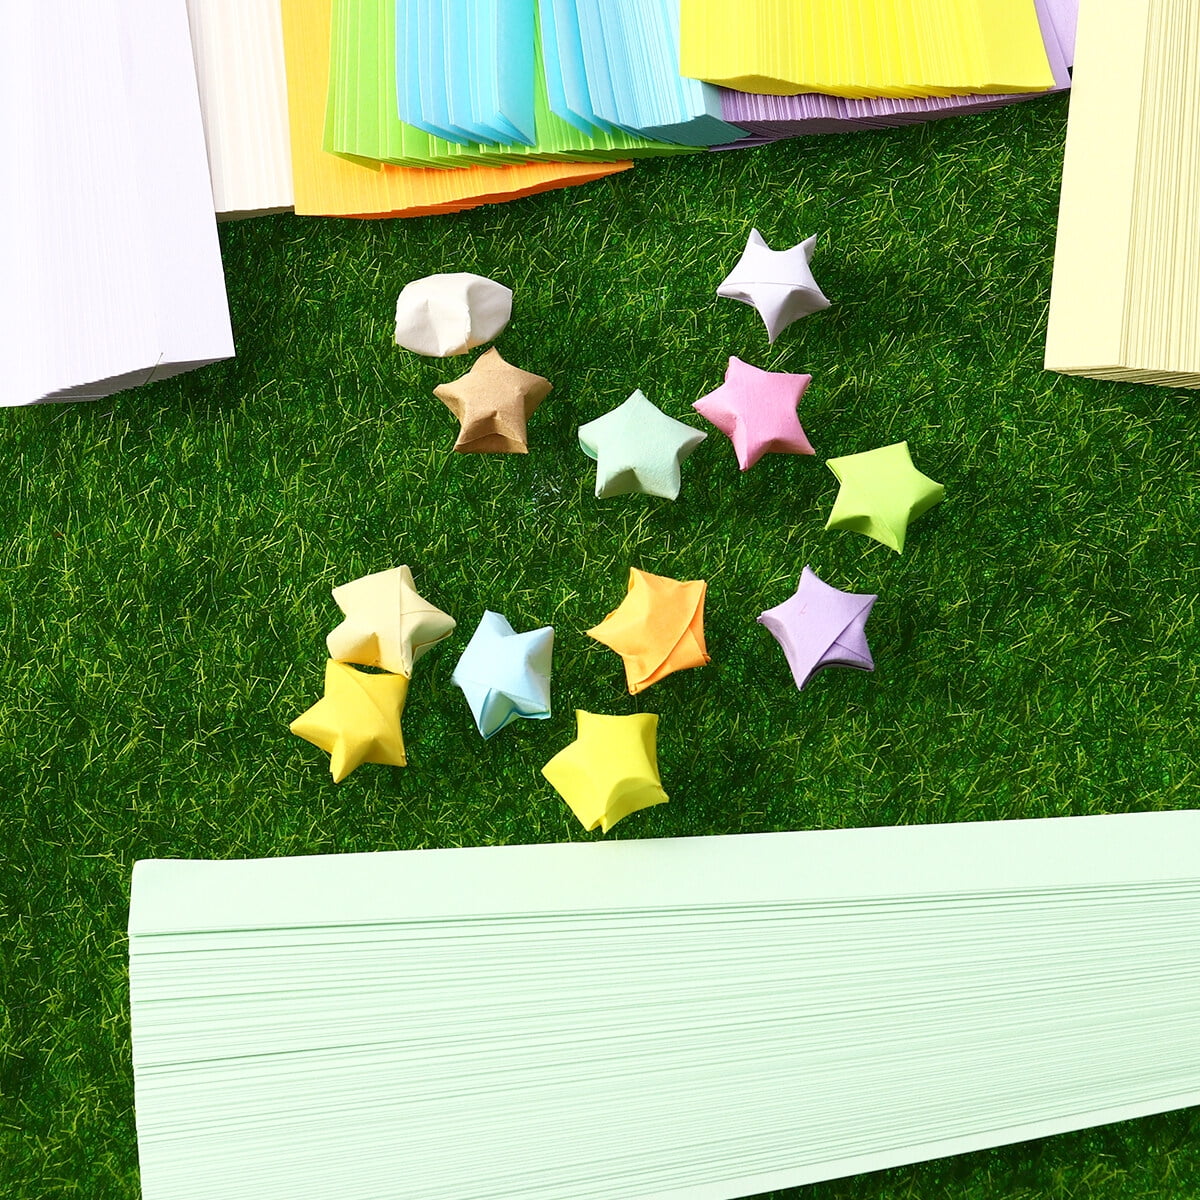 Star Origami Paper 12pcs Star Origami Five Star Paper Star Origami Paper Strips Folding Star Paper for Girls, Size: 25x4x1.5CM